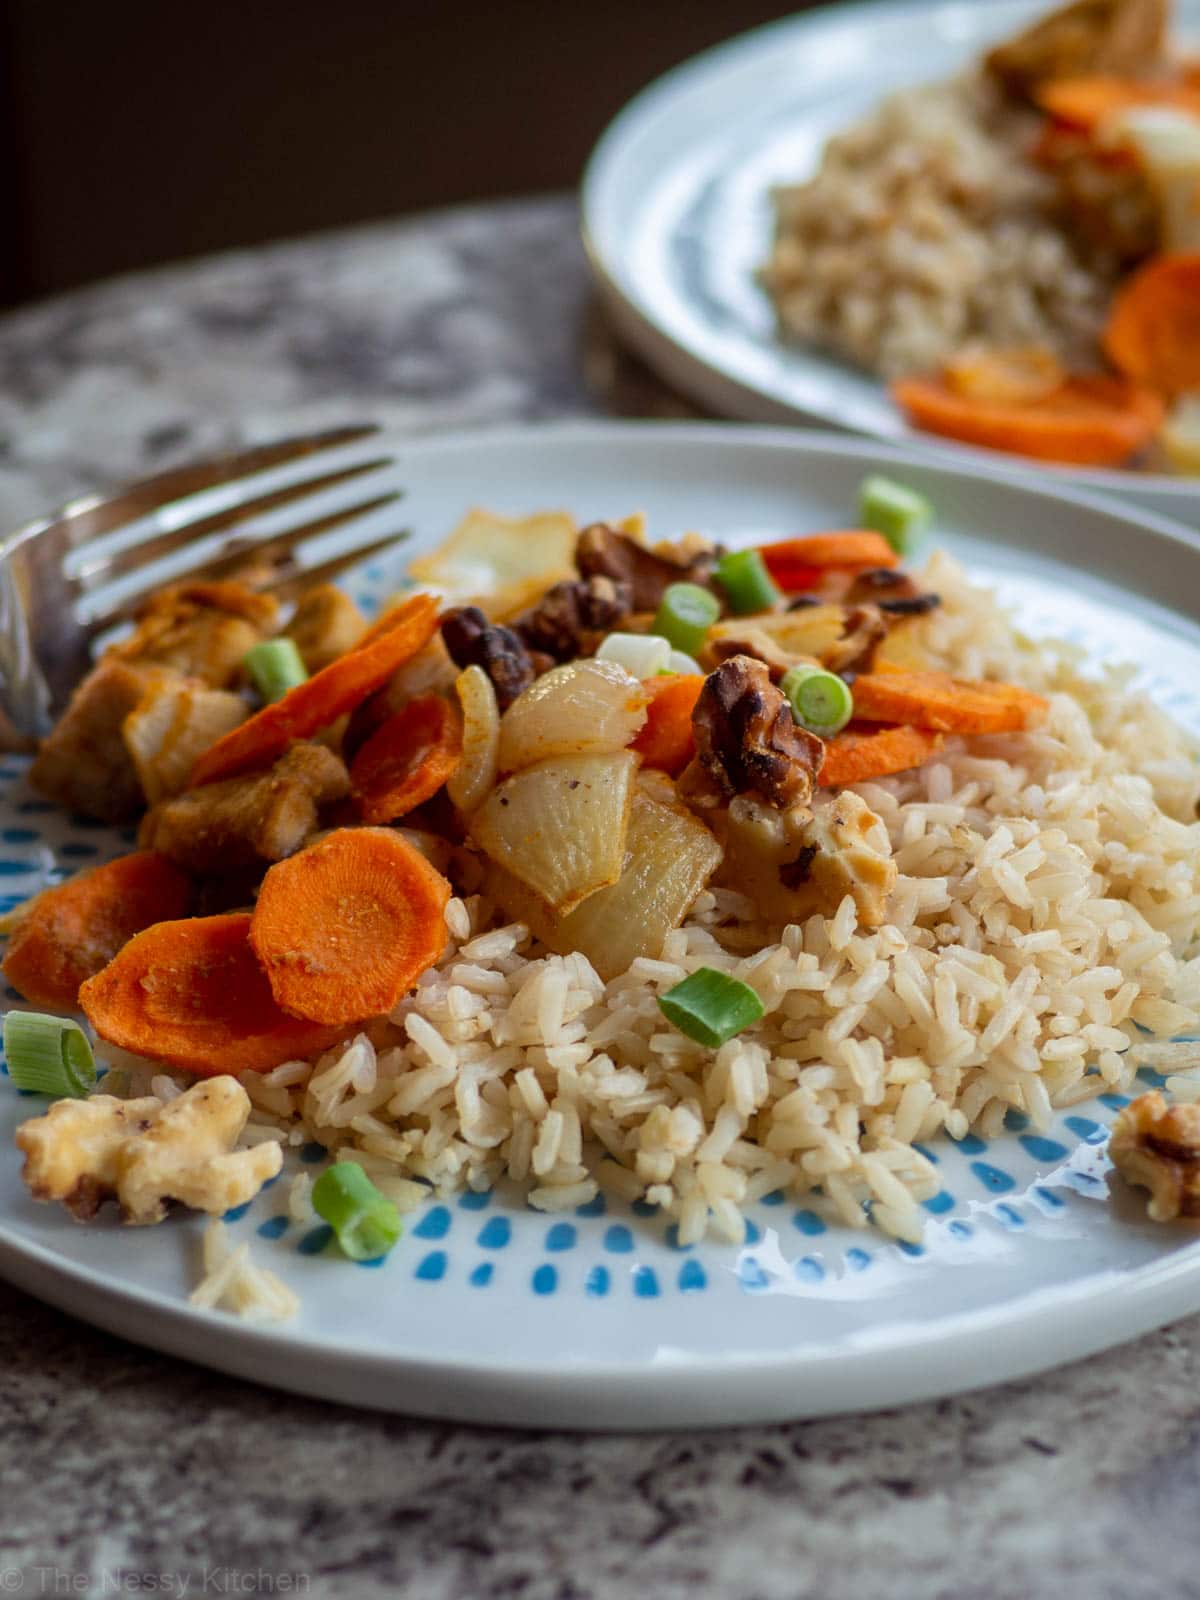 Chicken, carrots, onions and rice on a plate topped with chives and walnuts.